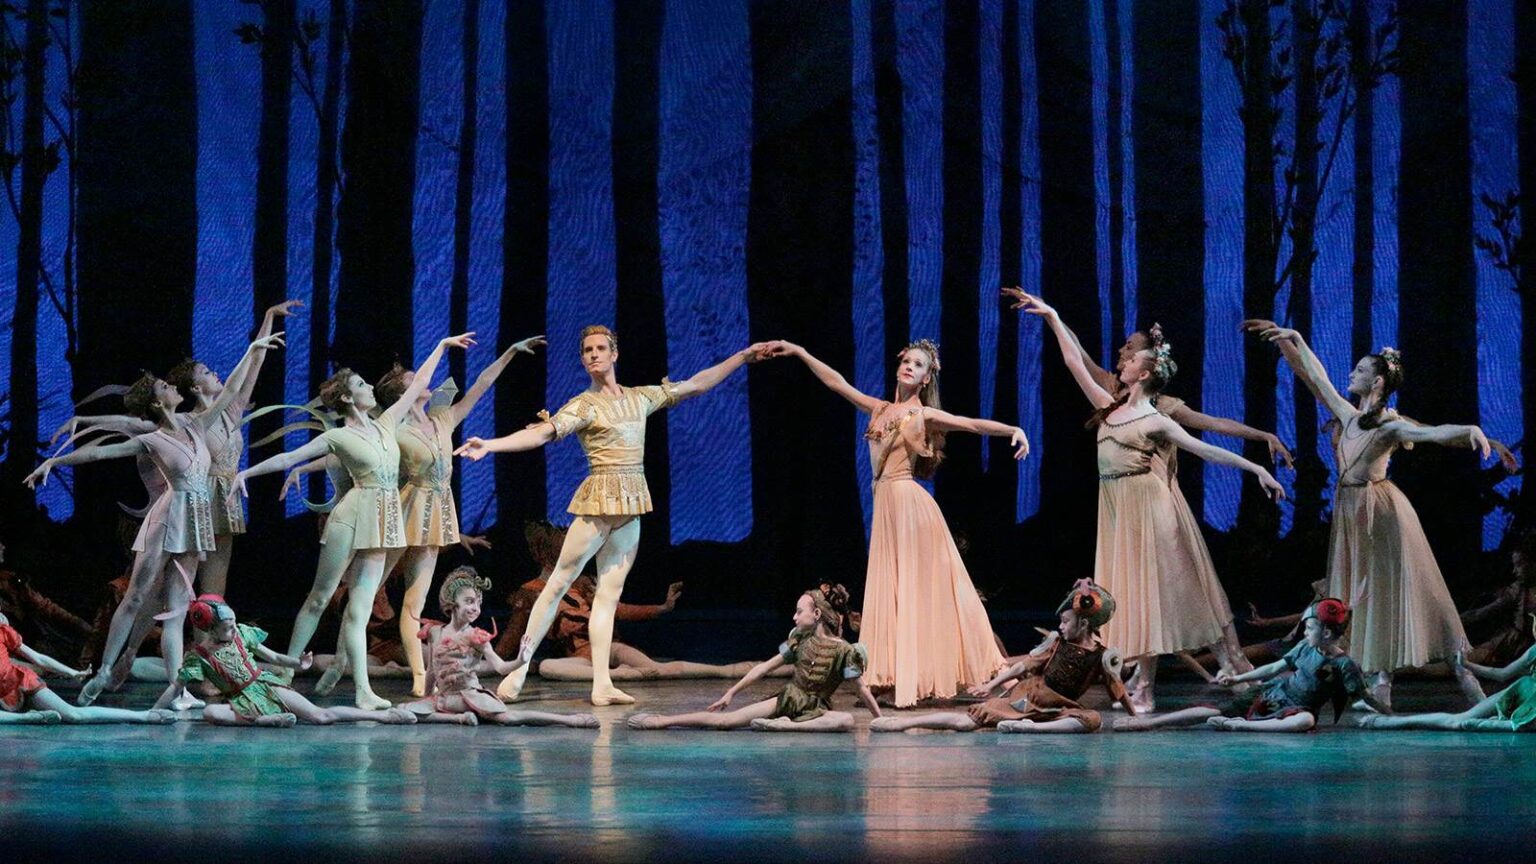 SPAC Announces 2023 Classical Season Featuring NYC Ballet & The